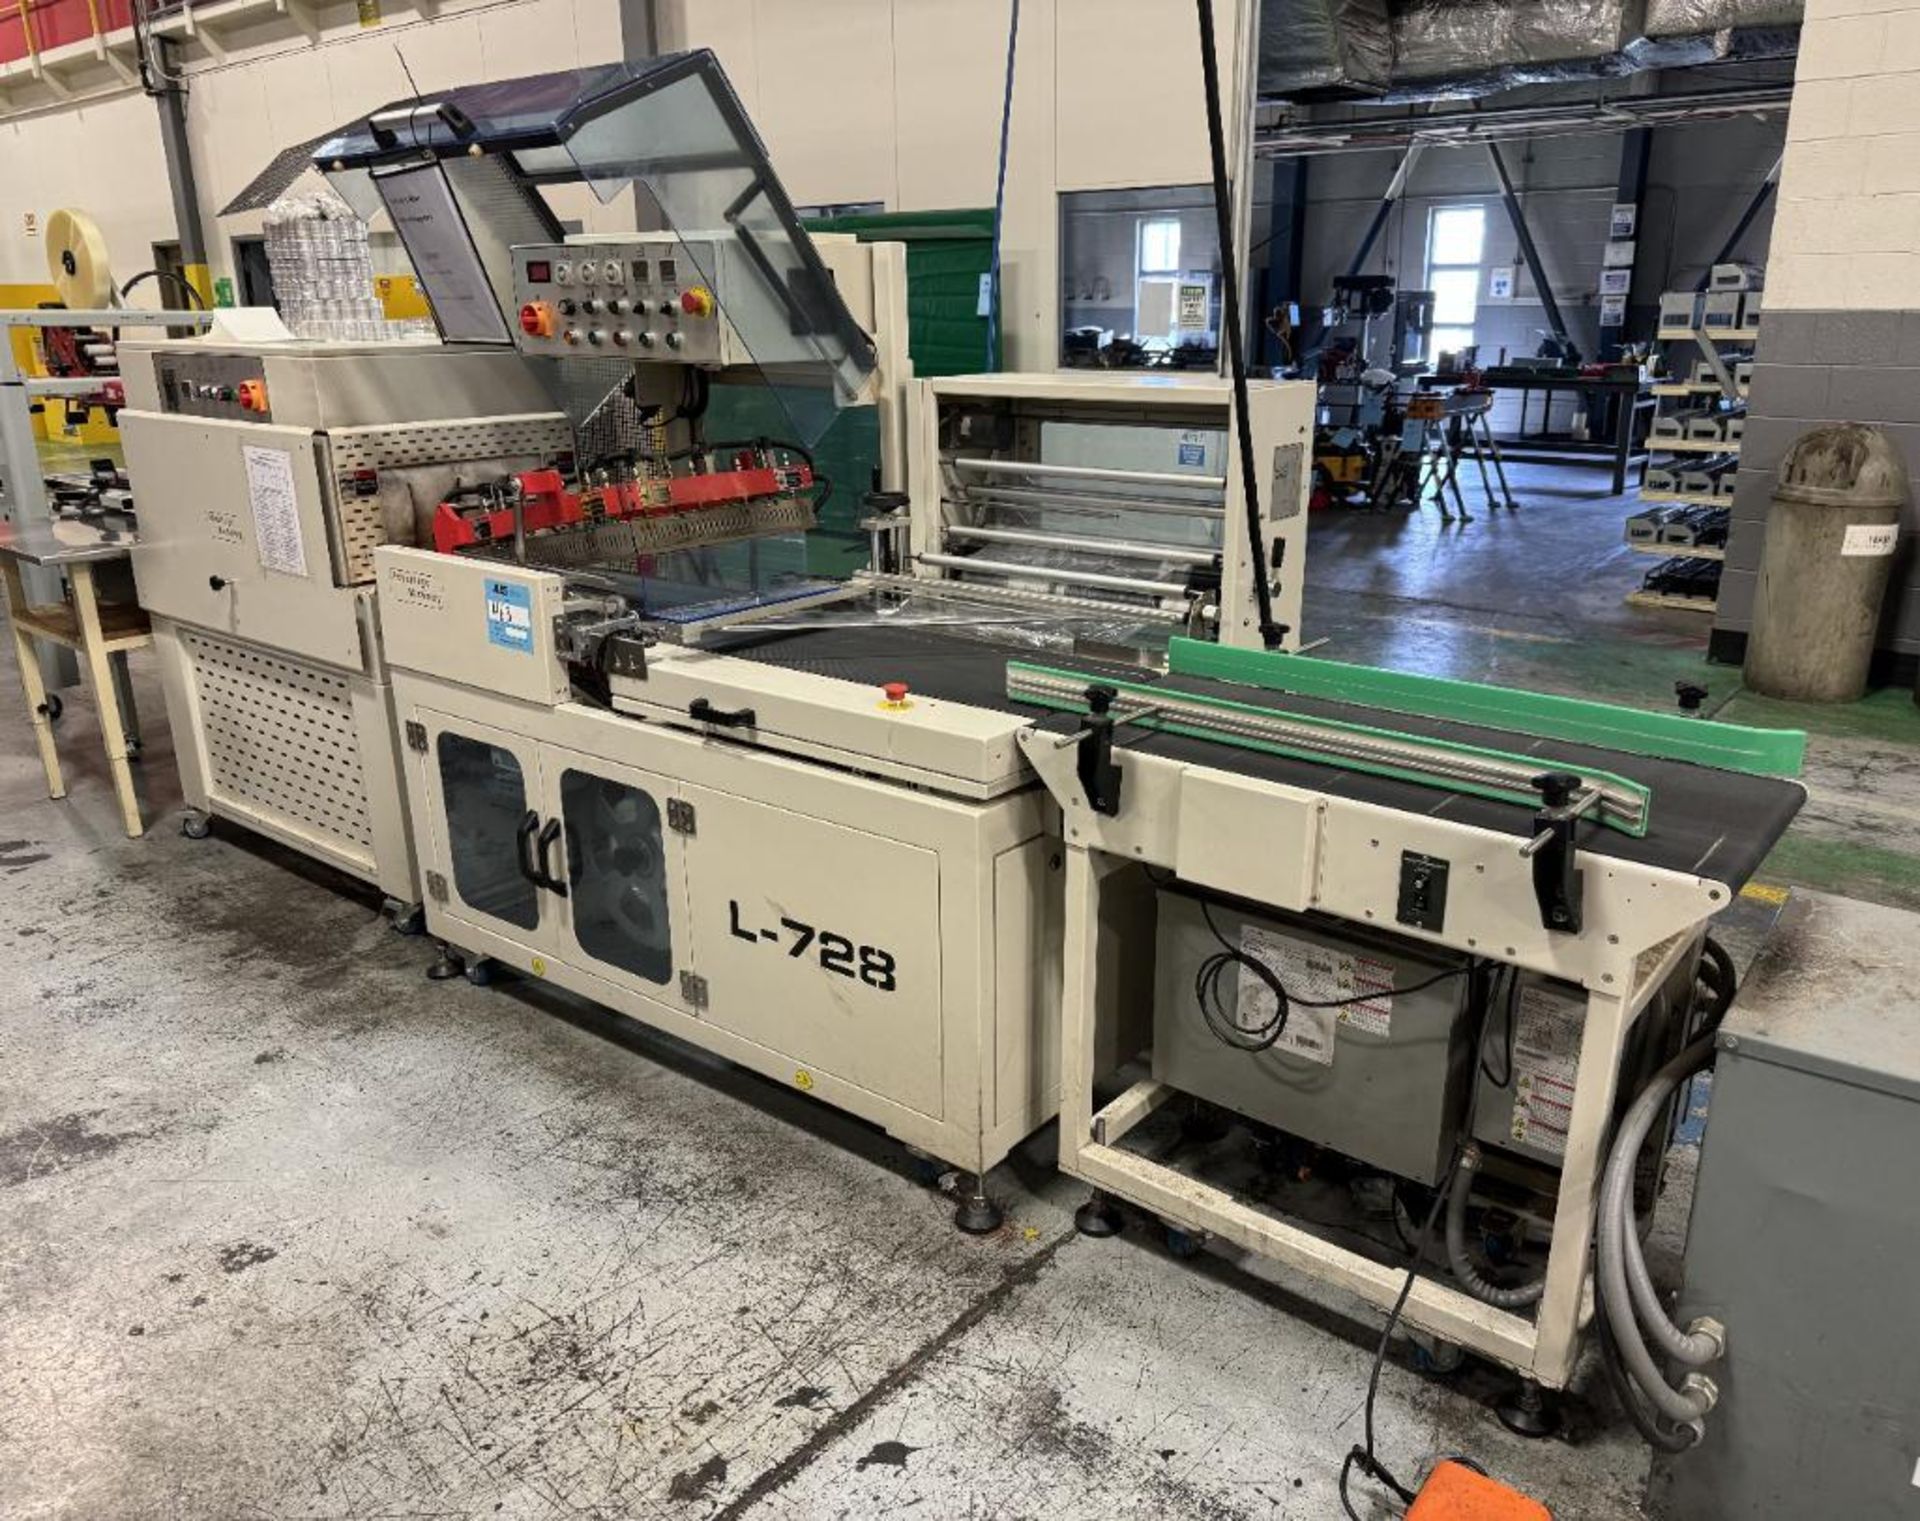 Advantage Machinery L-728 L-Bar Sealing Machine, Serial# 19-001156B, Built 2019. With belted conveyo